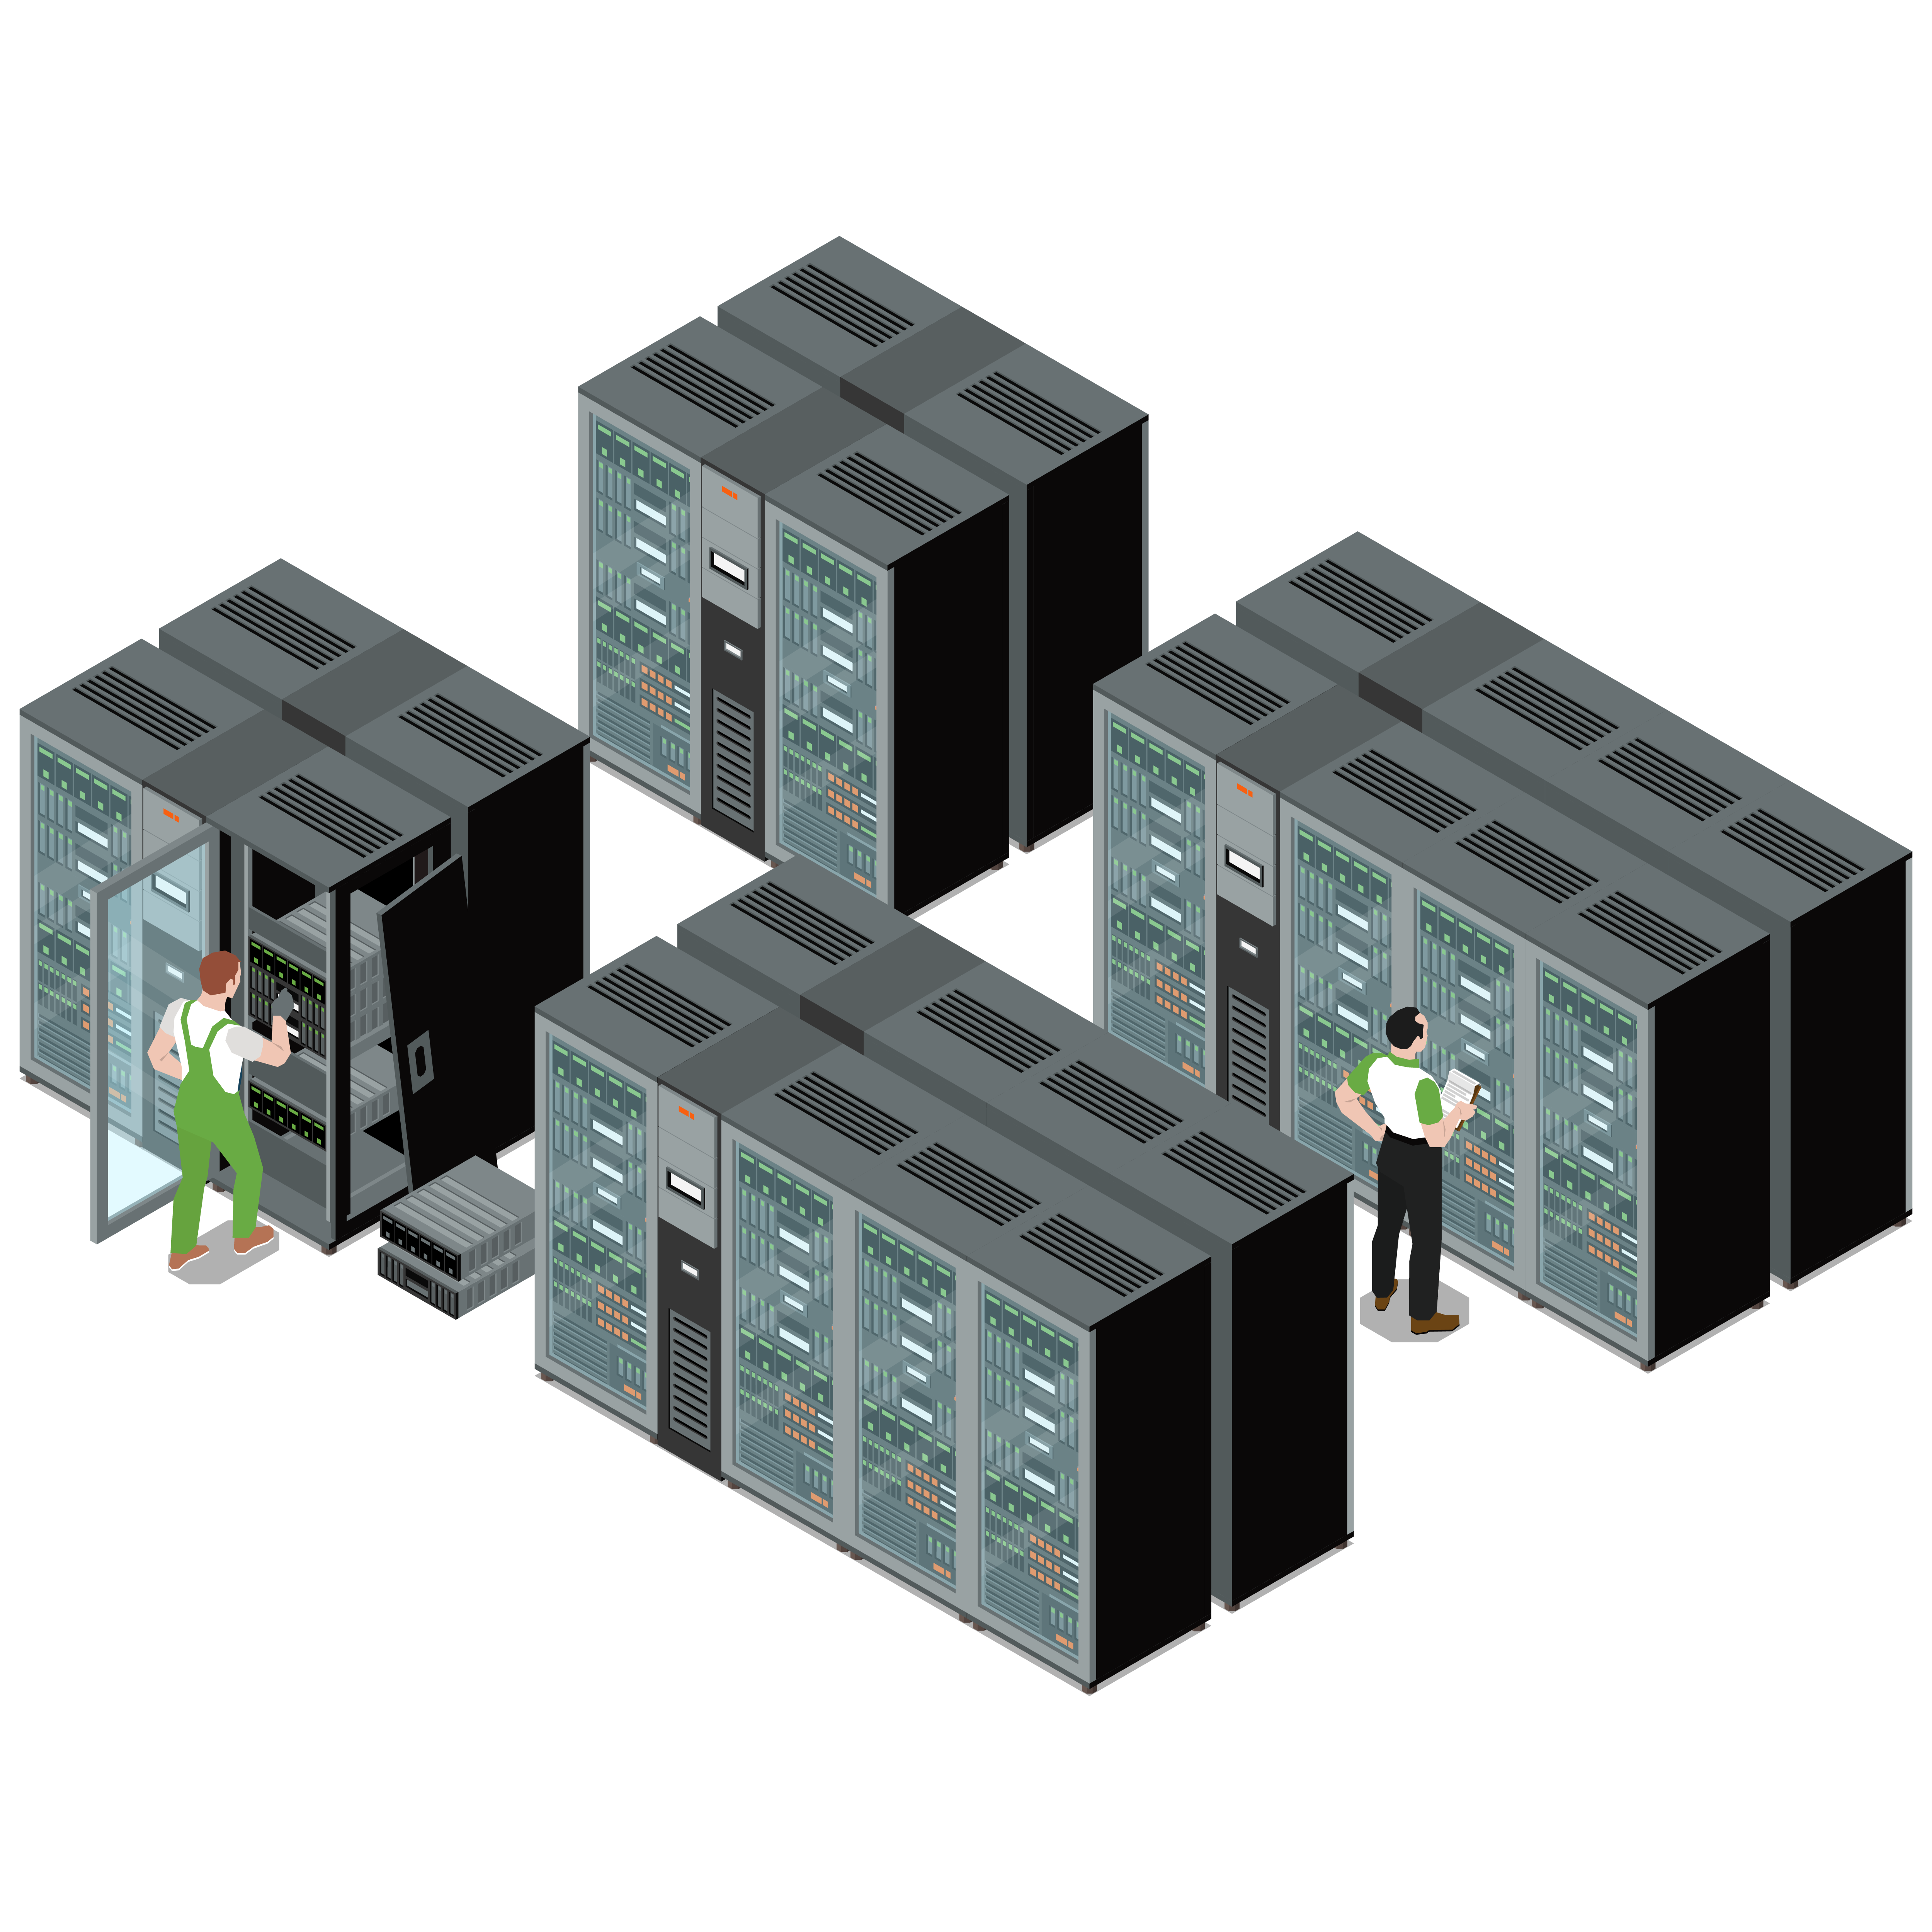 Illustration of a data center being decommissioned